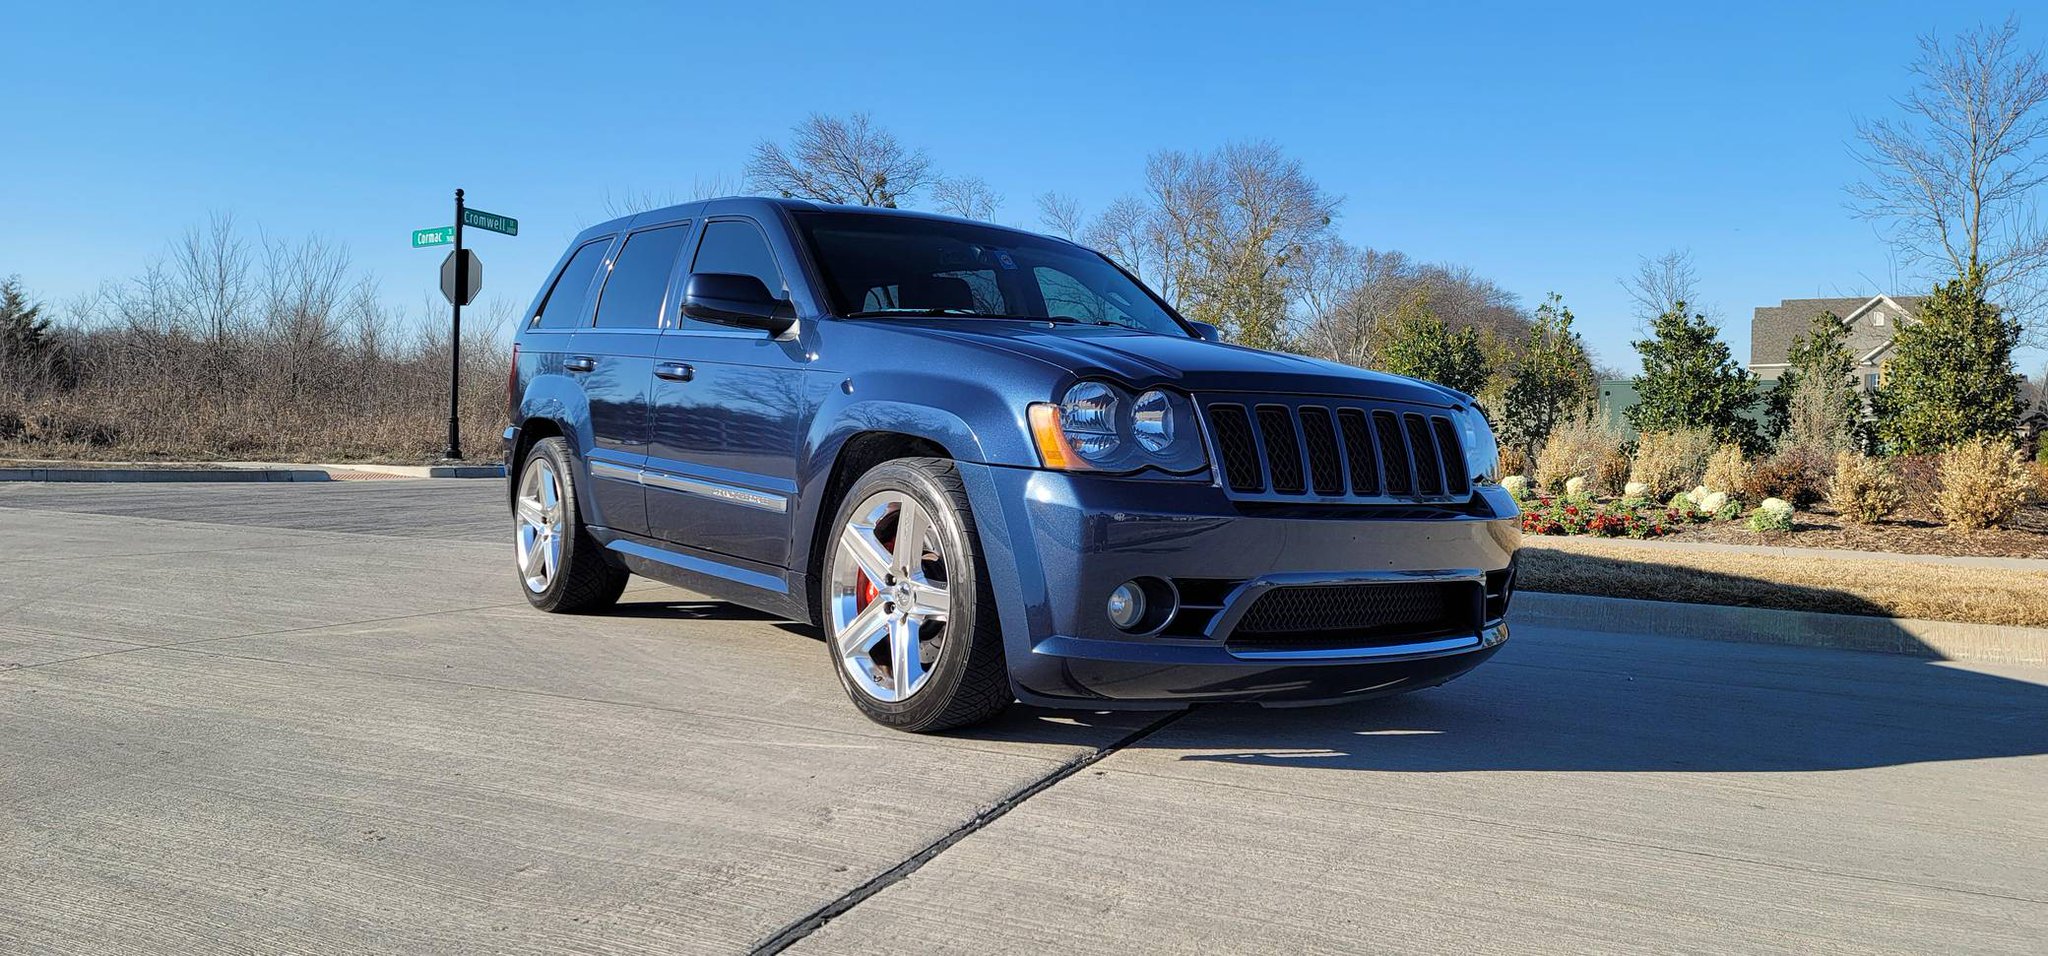 Doug Demuro Now On Carsandbids This Fantastic 09 Jeep Grand Cherokee Srt8 In A Gorgeous Color Called Modern Blue I Really Really Want This Jeep I Love These And